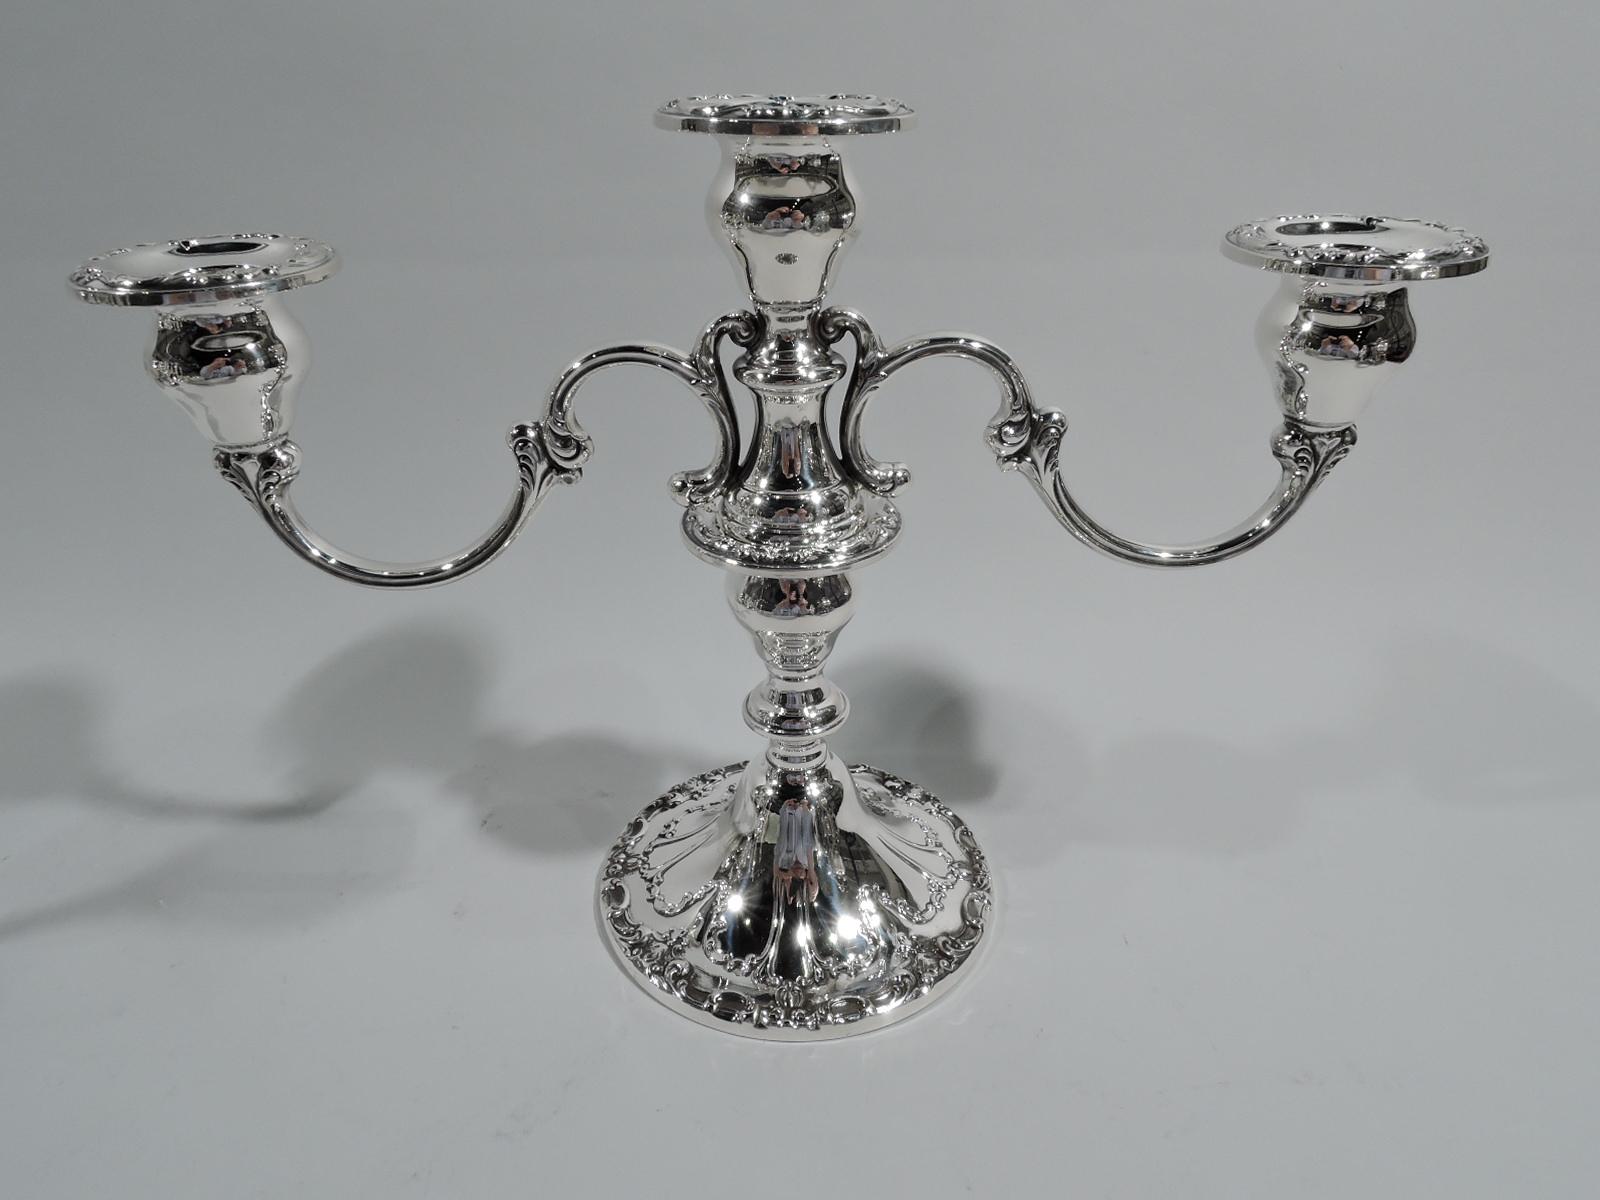 Pair of Chantilly Duchess sterling silver 3-light candelabra. Made by Gorham in Providence. Each: Central socket mounted with 2-scroll arms, each terminating in single socket. Knopped and baluster shaft on raised foot. Low-relief scroll and flower